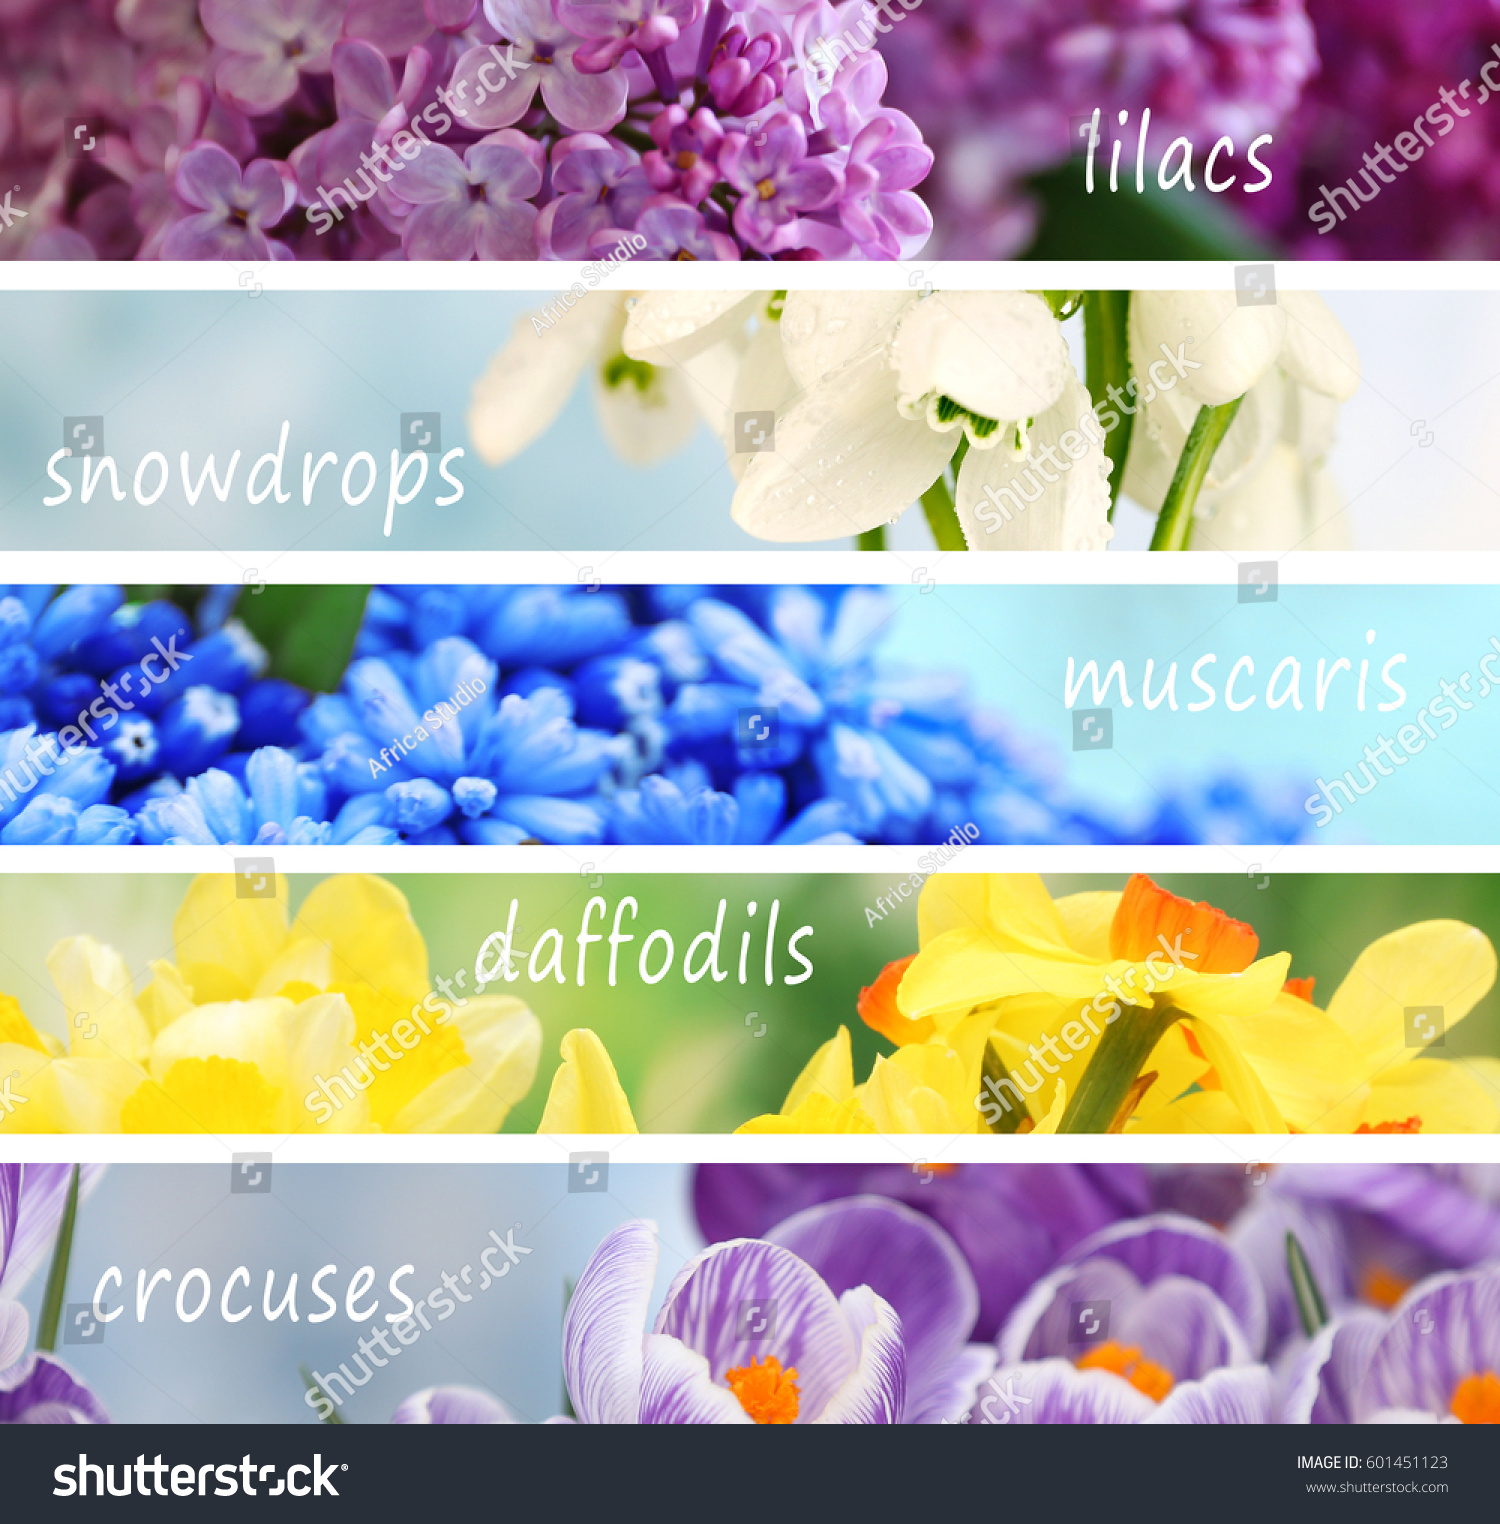 Collage Beautiful Flowers Names Nature Stock Image 601451123,Types Of Window Coverings For Sliding Glass Doors